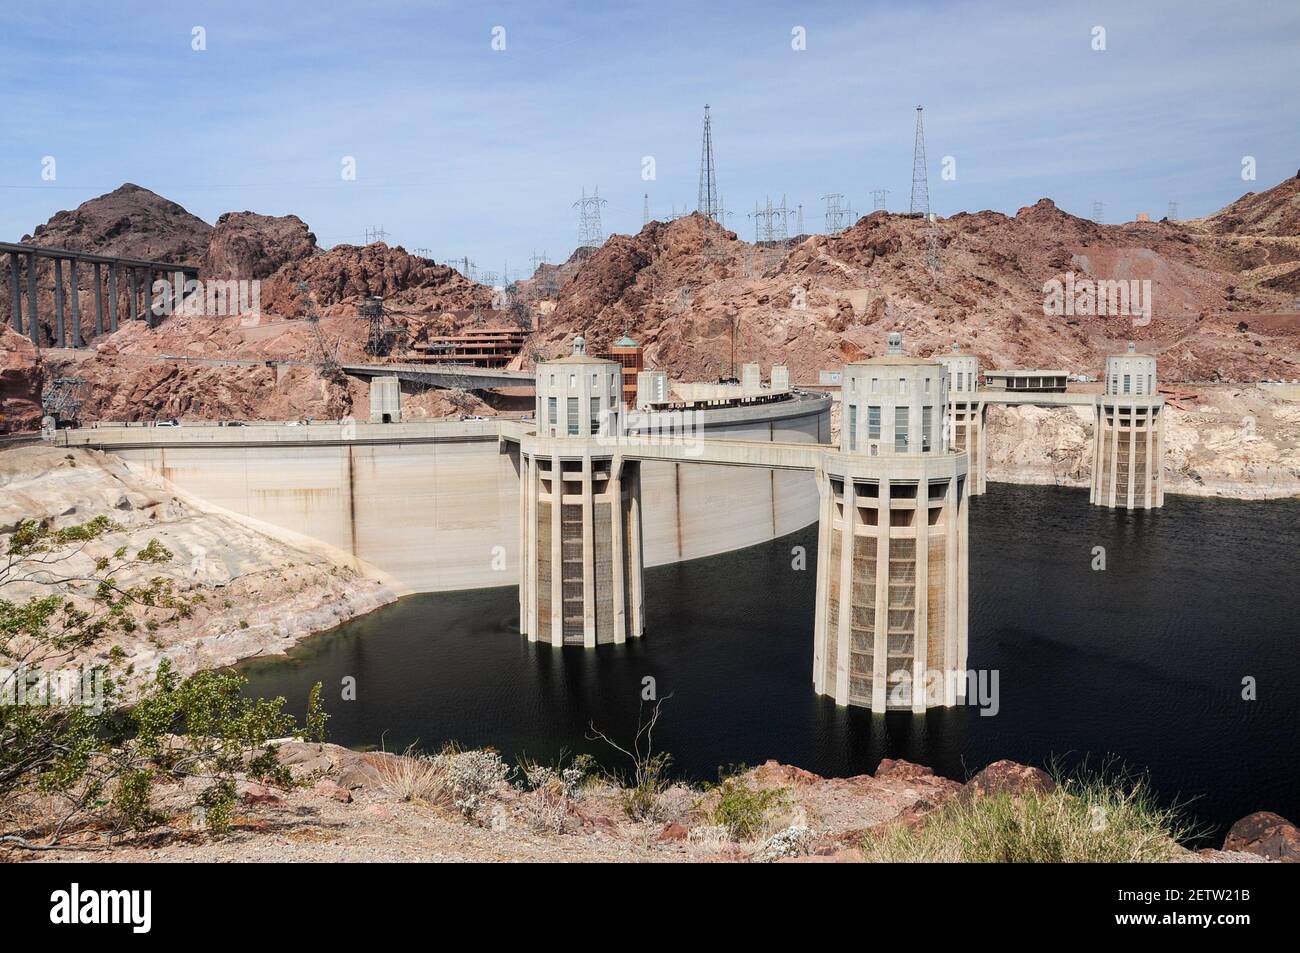 View of the penstock towers over Lake Mead at Hoover Dam, between Arizona and Nevada states, USA. Stock Photo